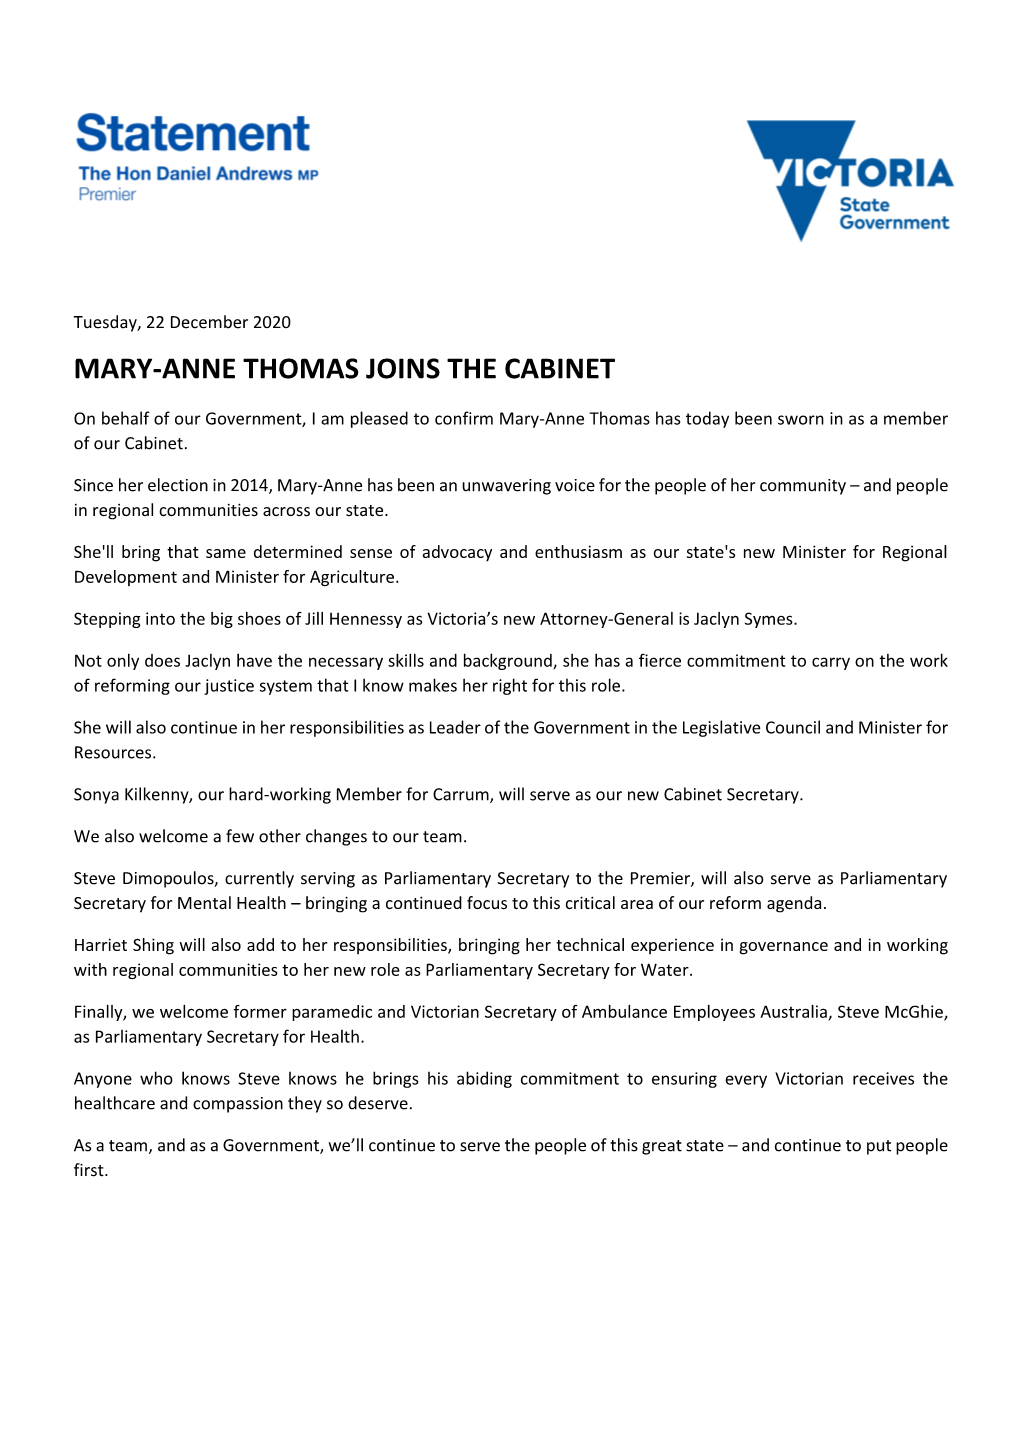 Mary-Anne Thomas Joins the Cabinet